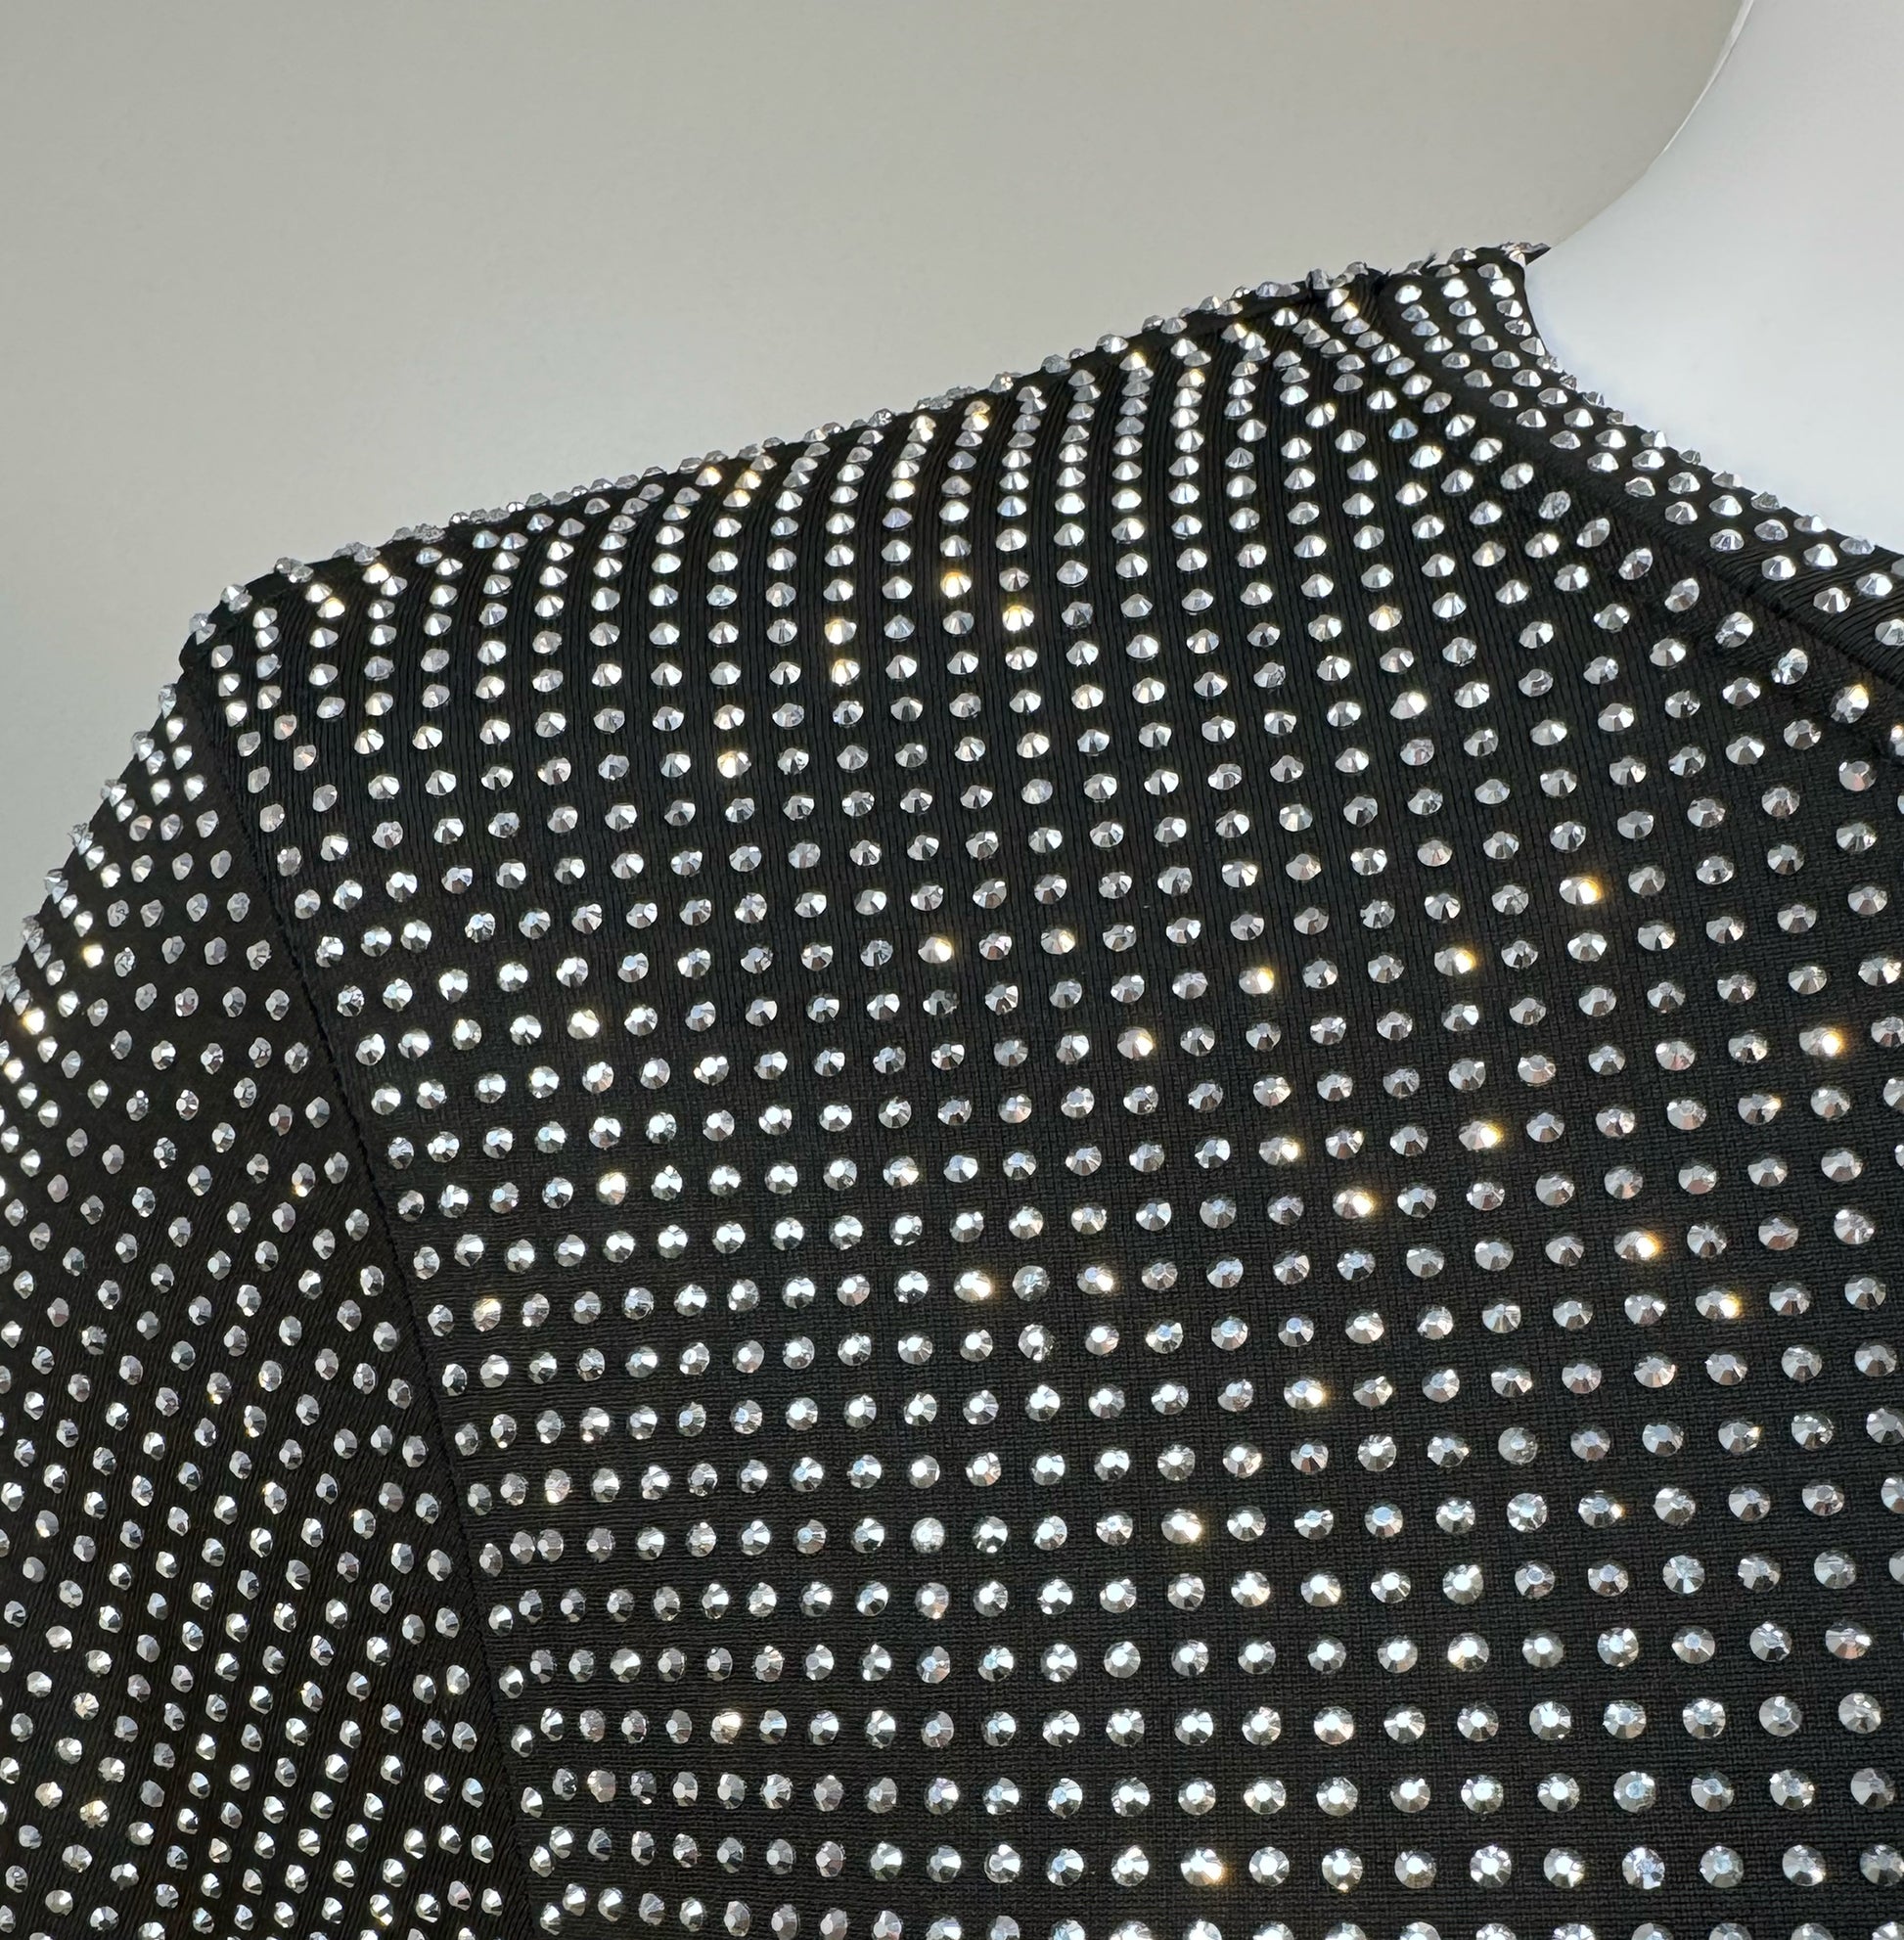 Shoulder detail of Silver Crystals on Black Fabric T-shirt revealing the impeccable construction of this complex garment.